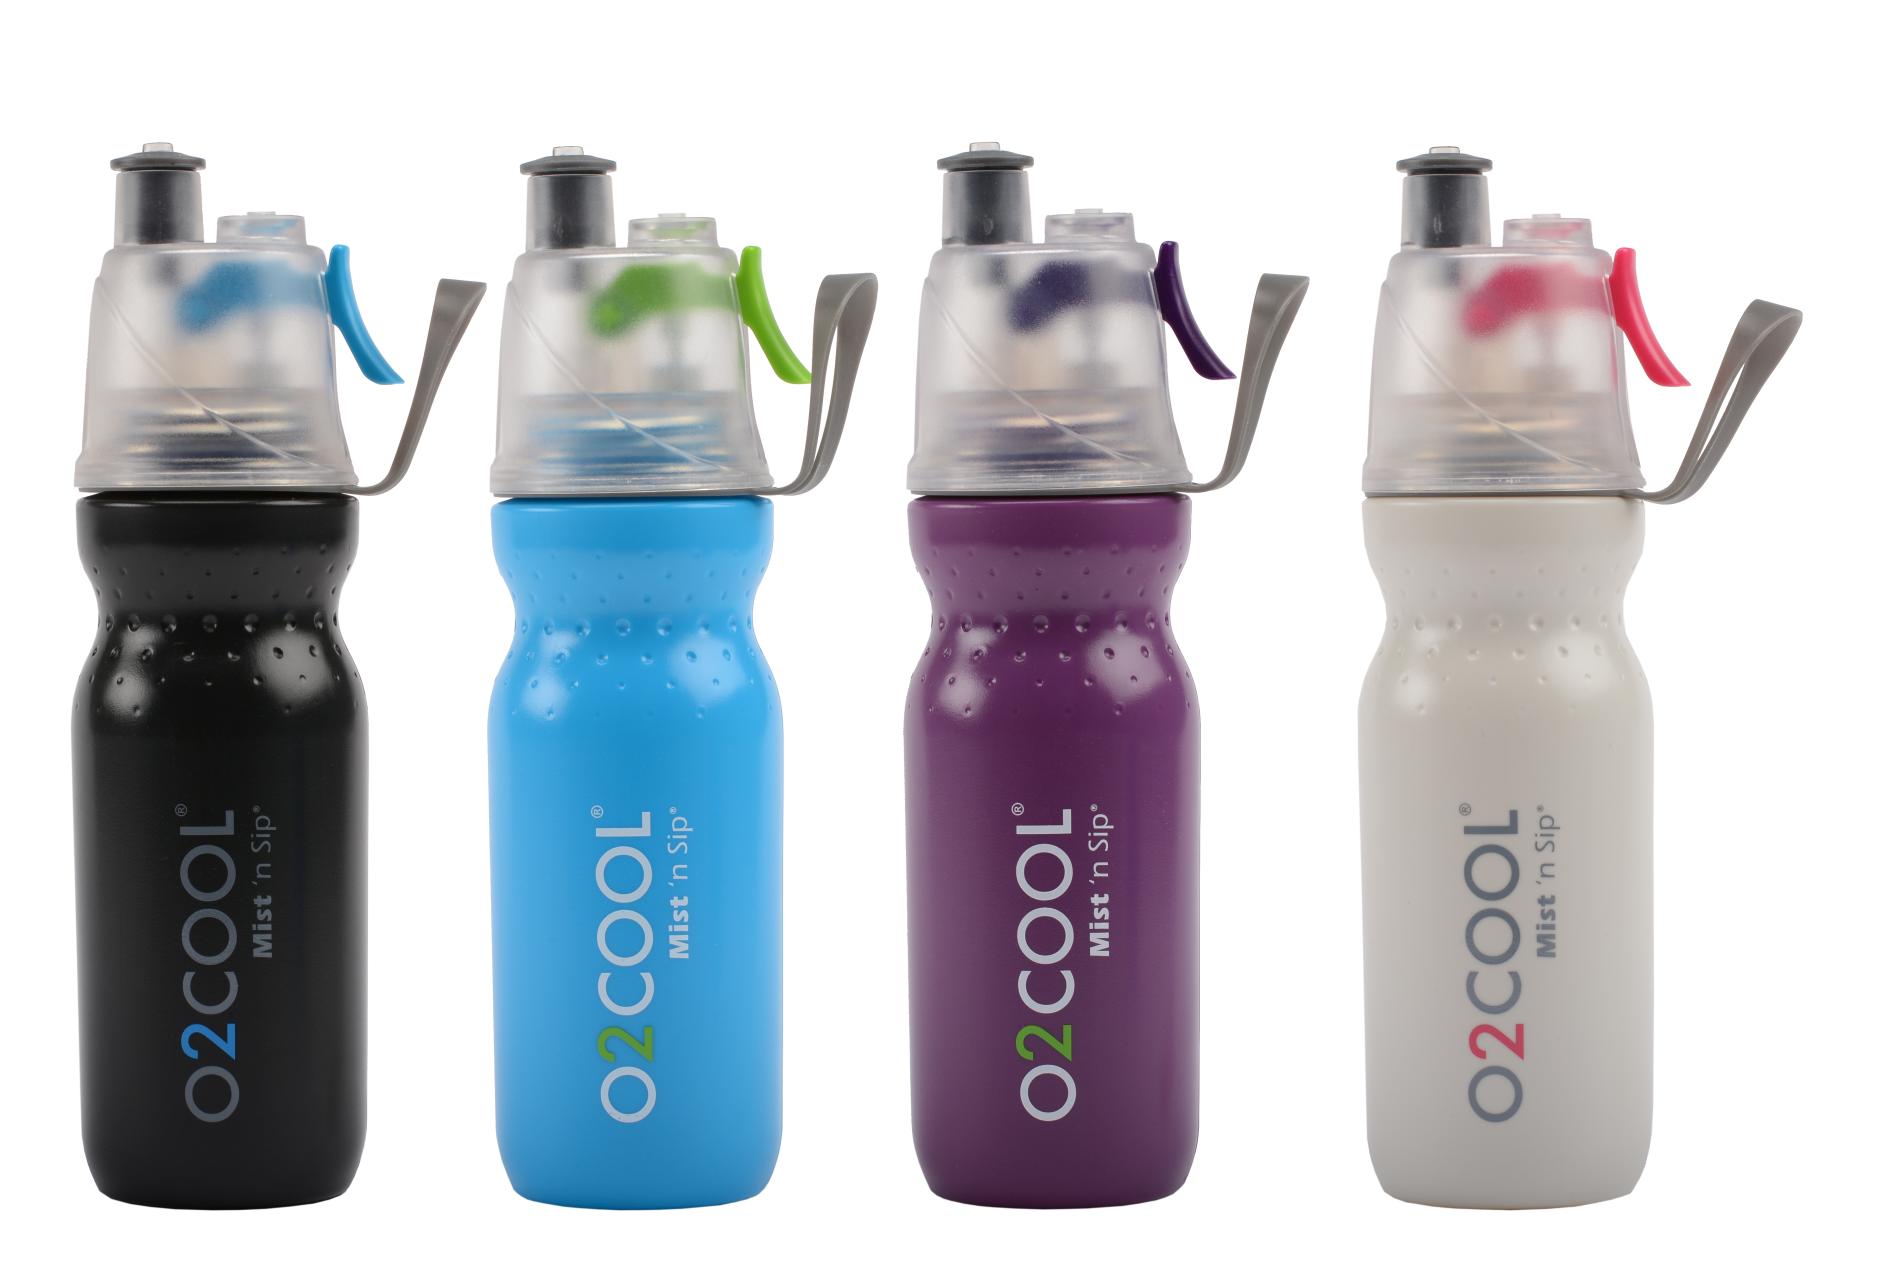 O2Cool 6-Pack ArcticSqueeze Classic 20-Ounce Mist 'N Sip Water Bottles